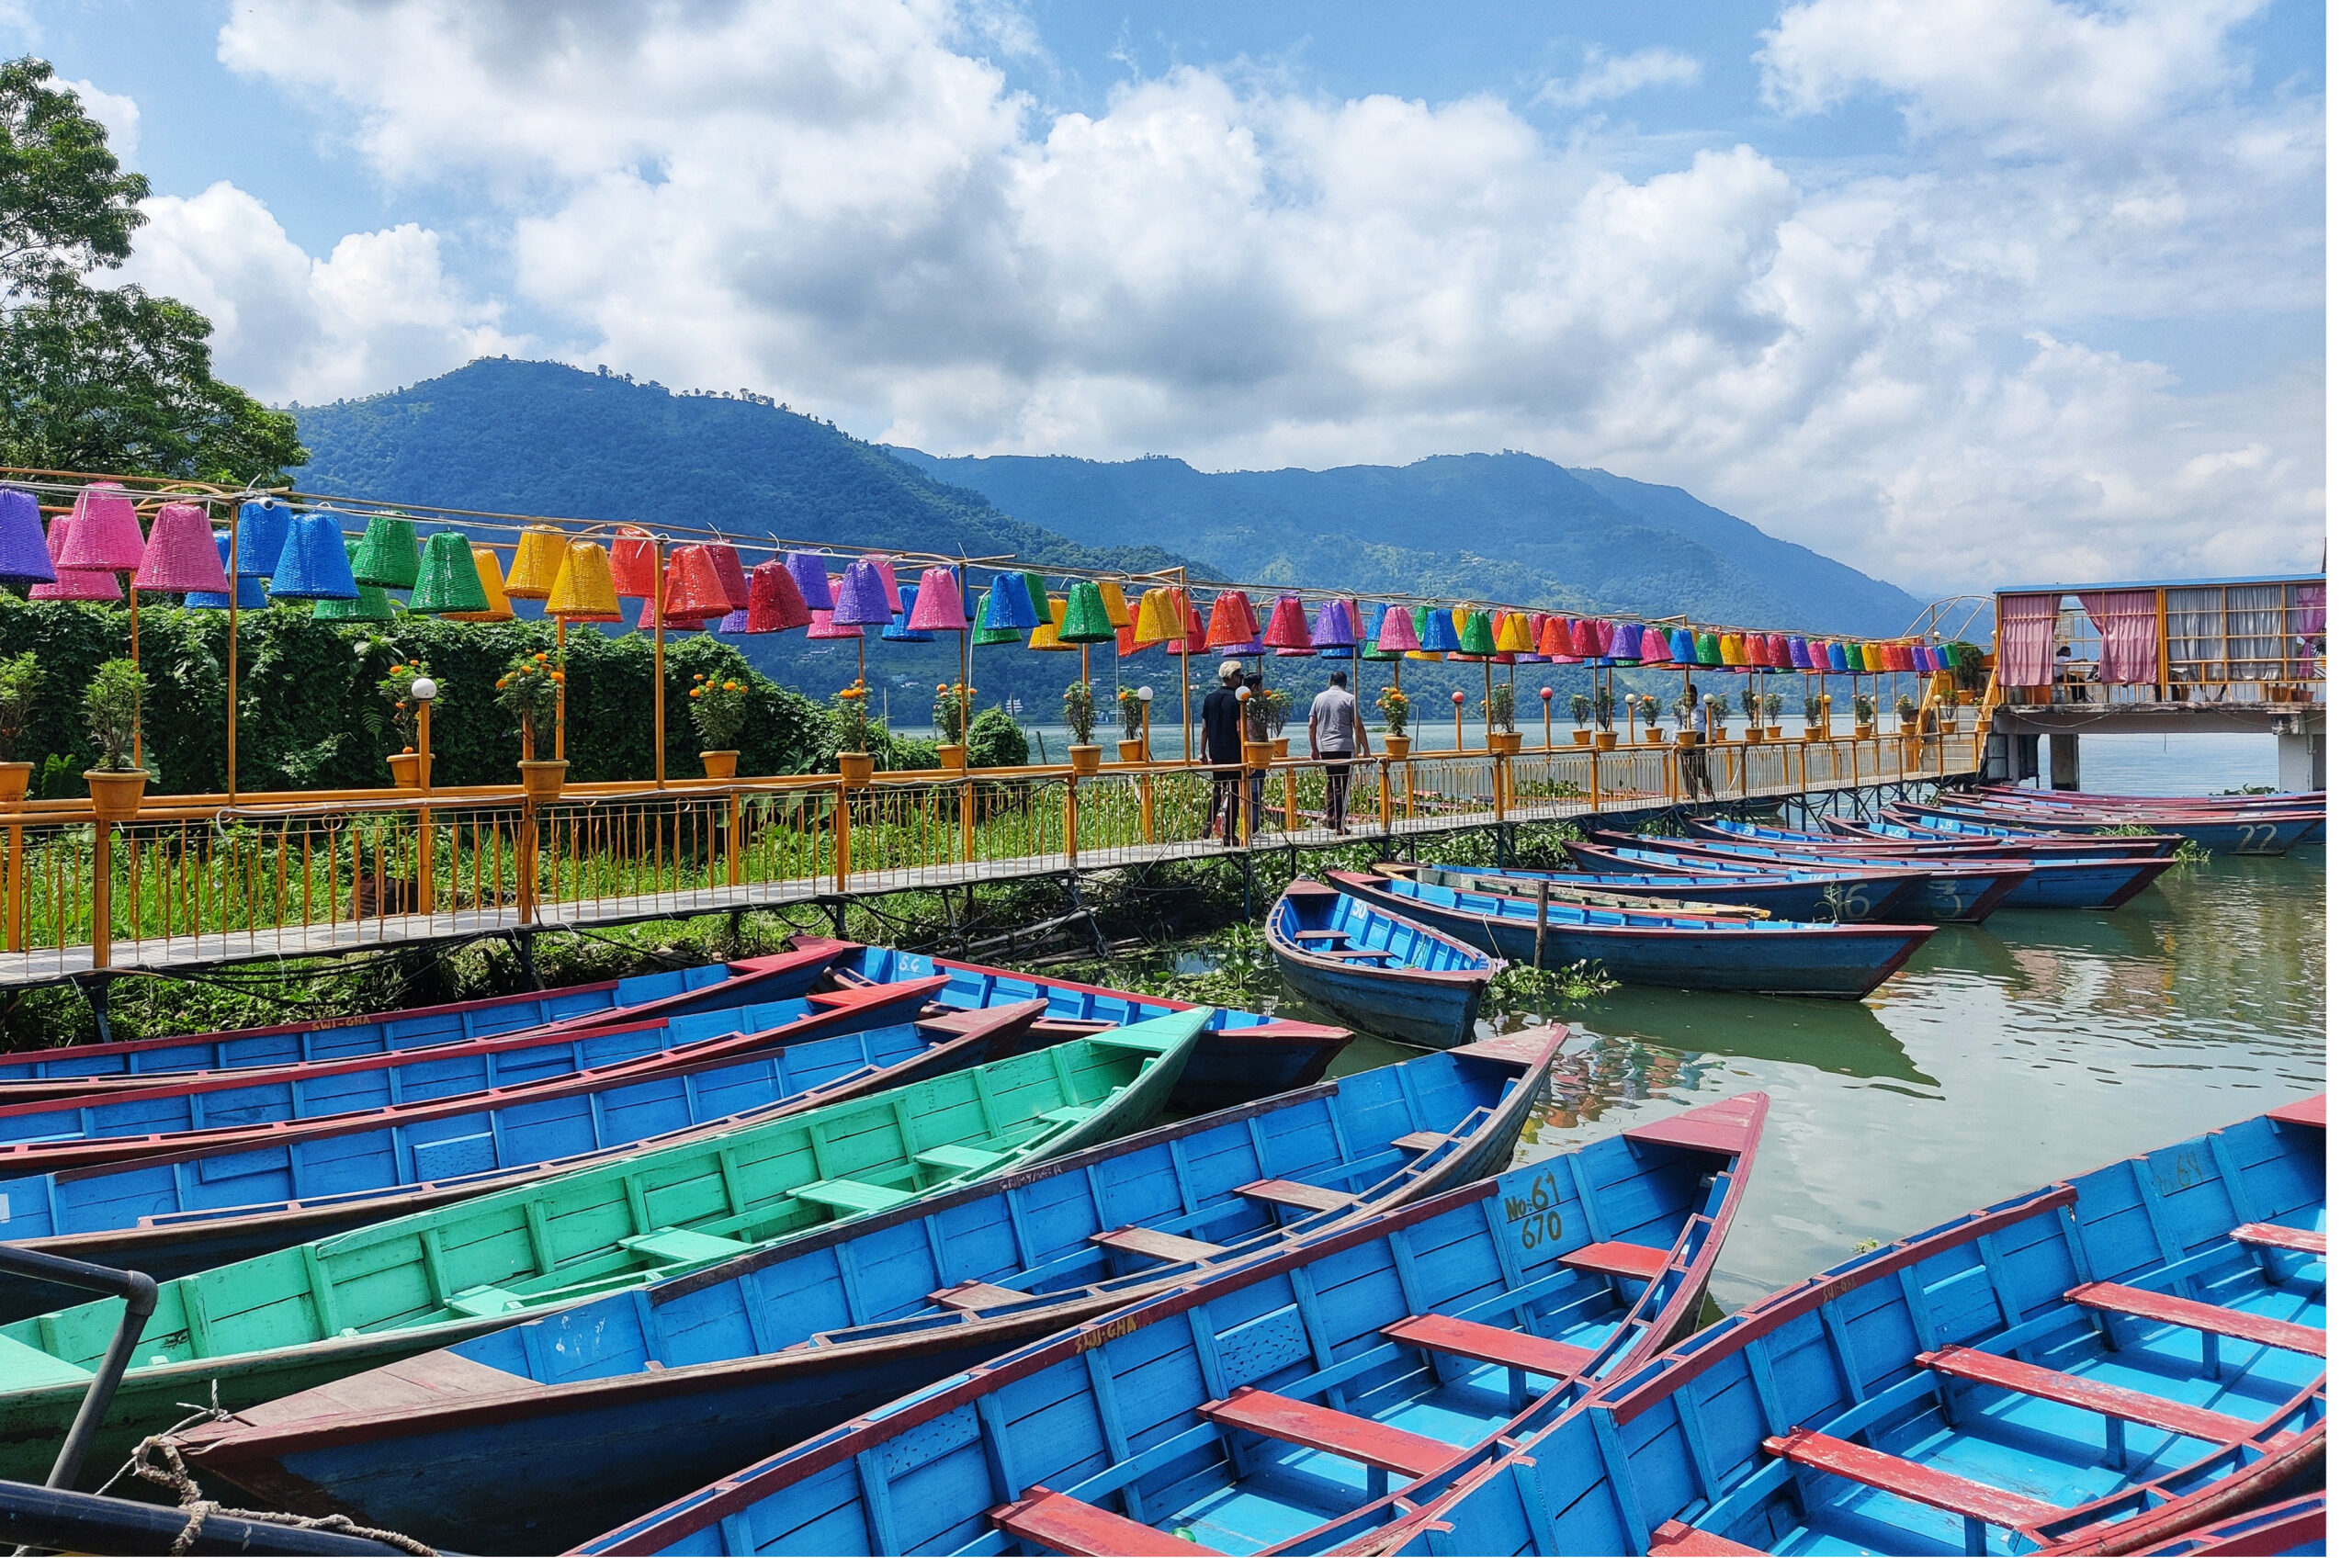 Pokhara to be declared Nepal’s ‘Tourism Capital’